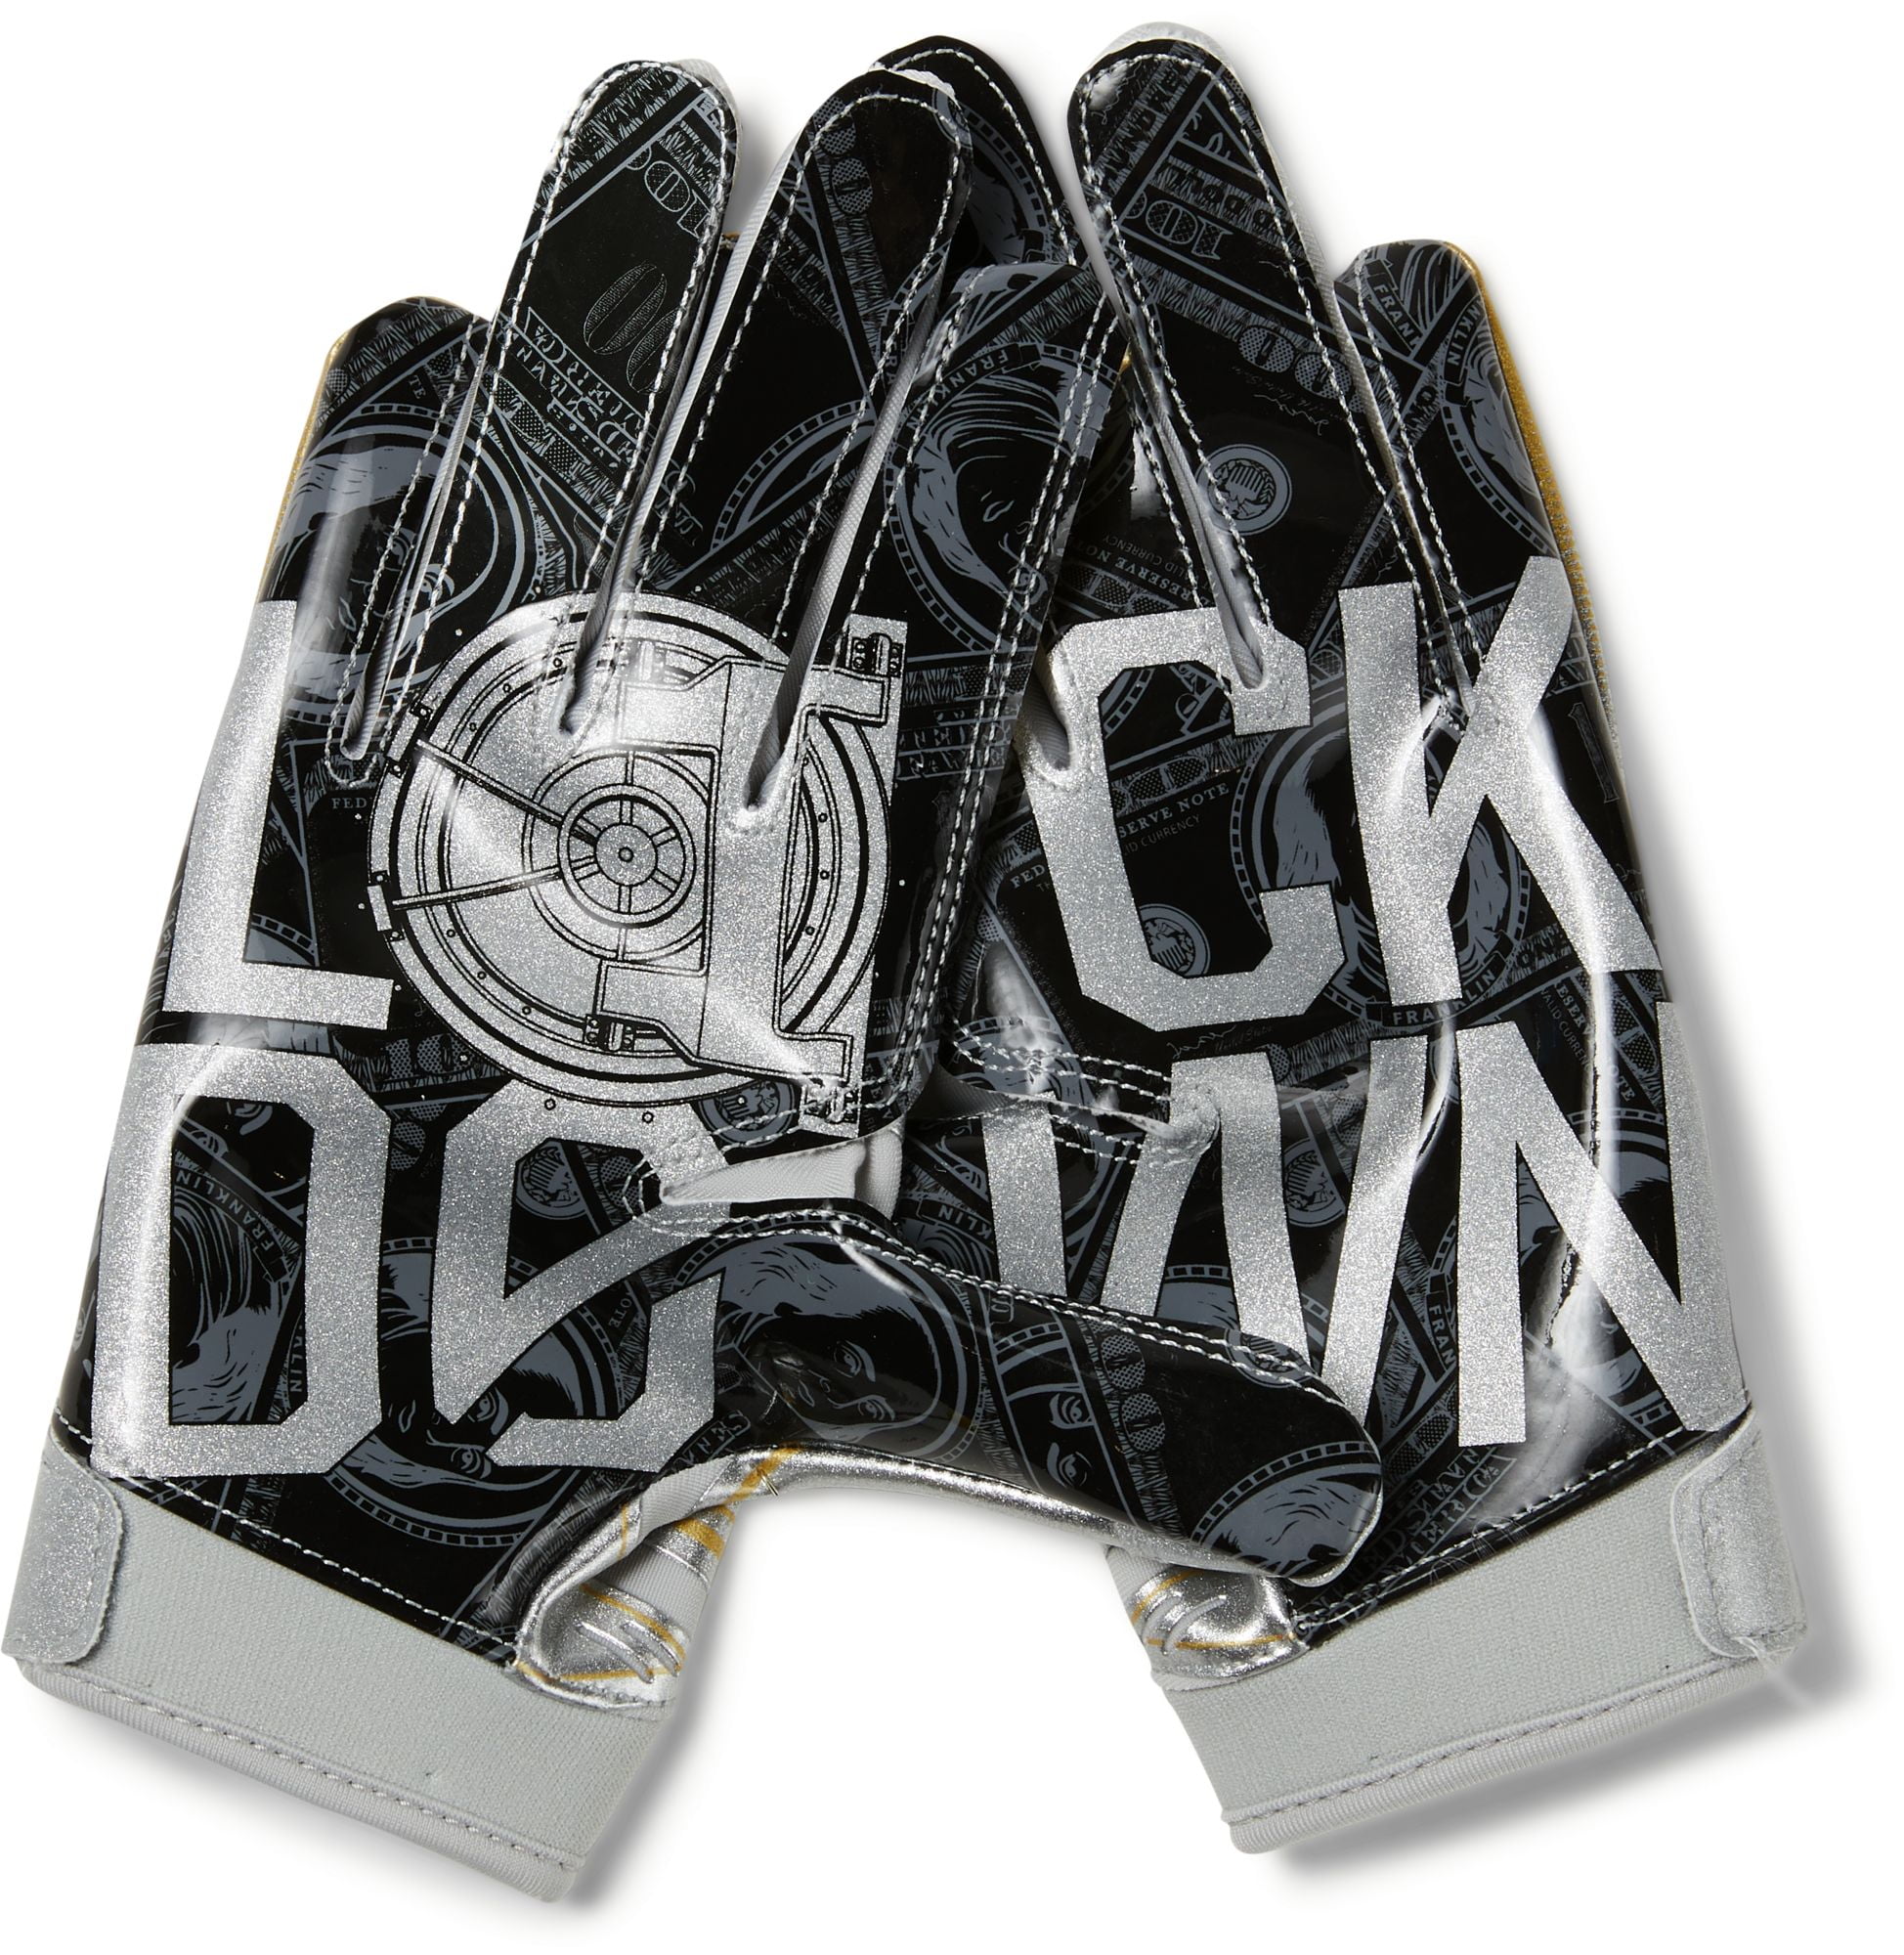 under armour youth limited edition f6 receiver gloves